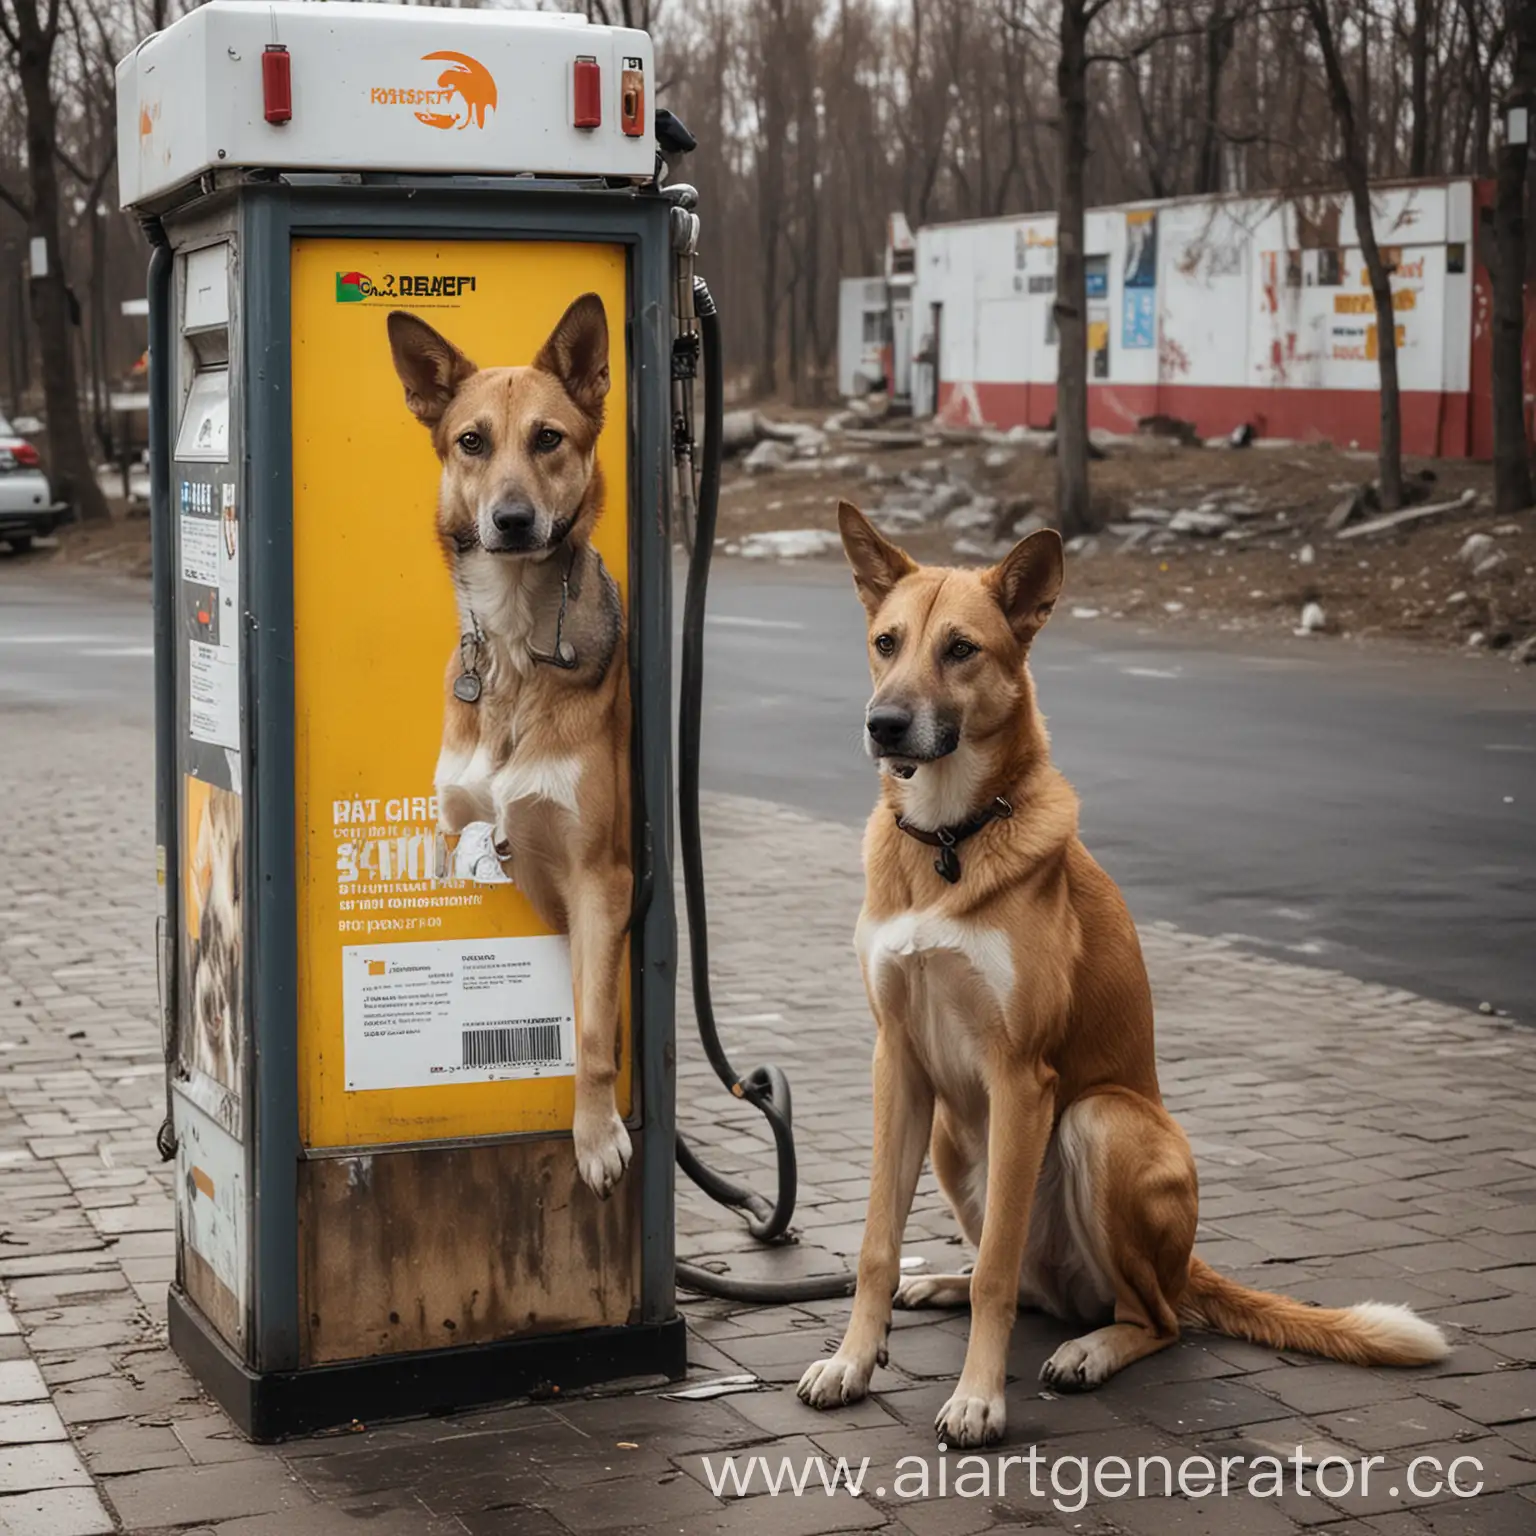 Positive-Advertisement-at-Gas-Station-ROSNEFT-Exhibition-of-Homeless-Domestic-Animals